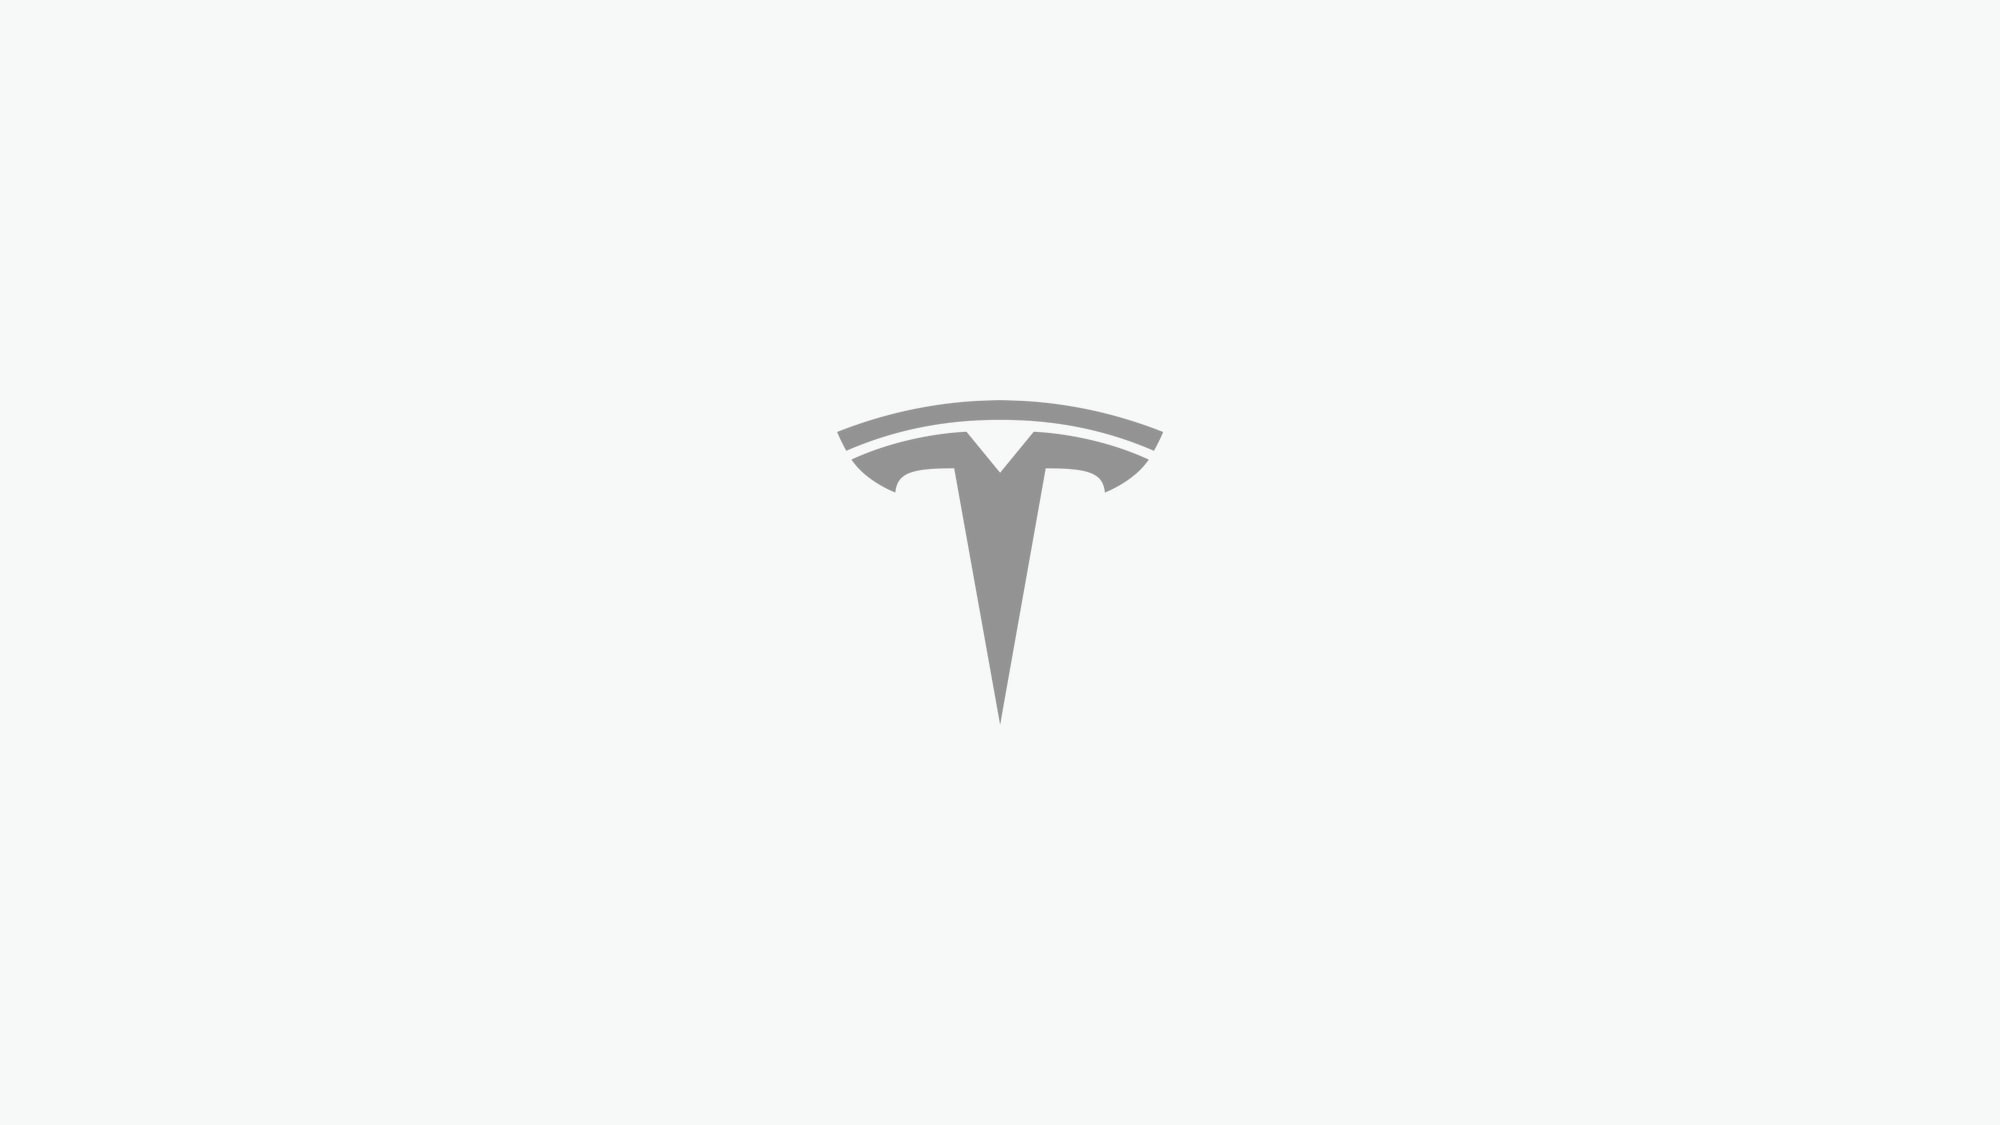 Tesla Amount Charged Bugfix feature in update 4.4.4